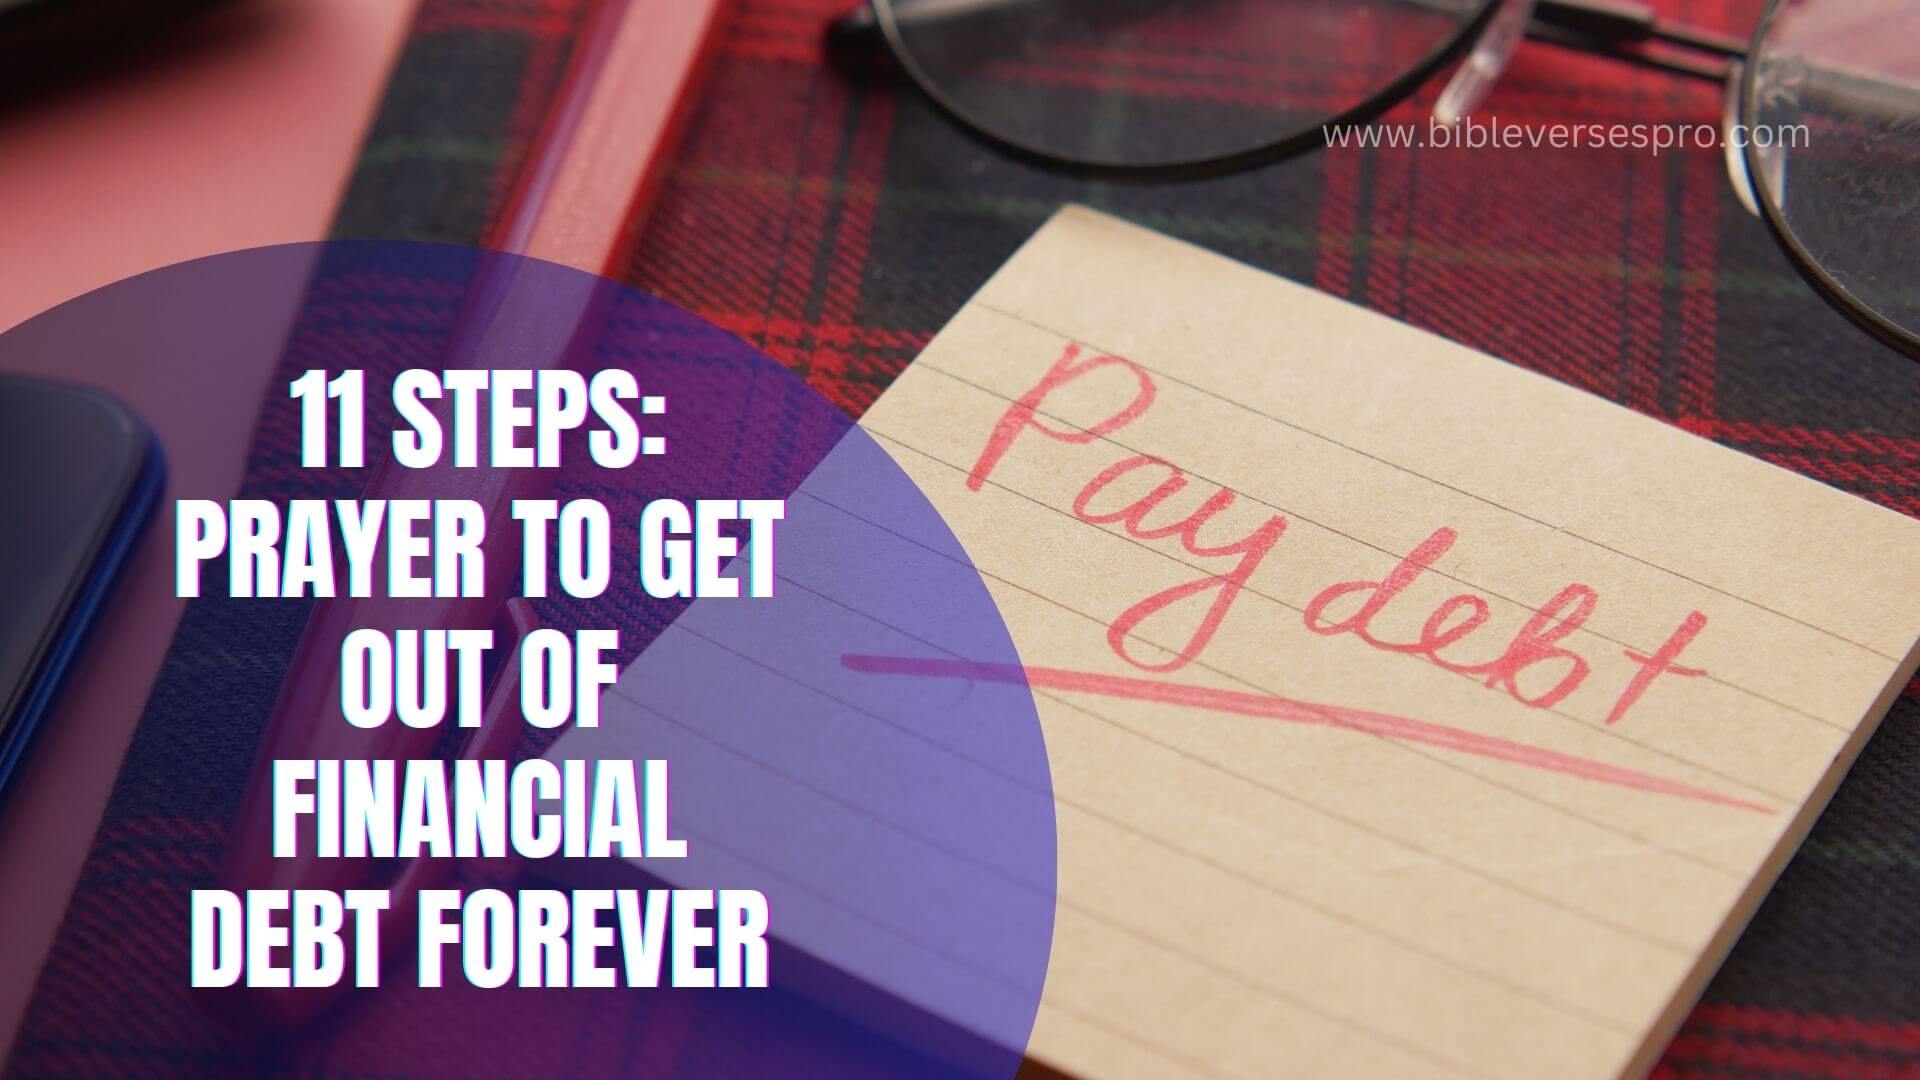 11 Steps Prayer to Get Out of Financial Debt Forever (1)